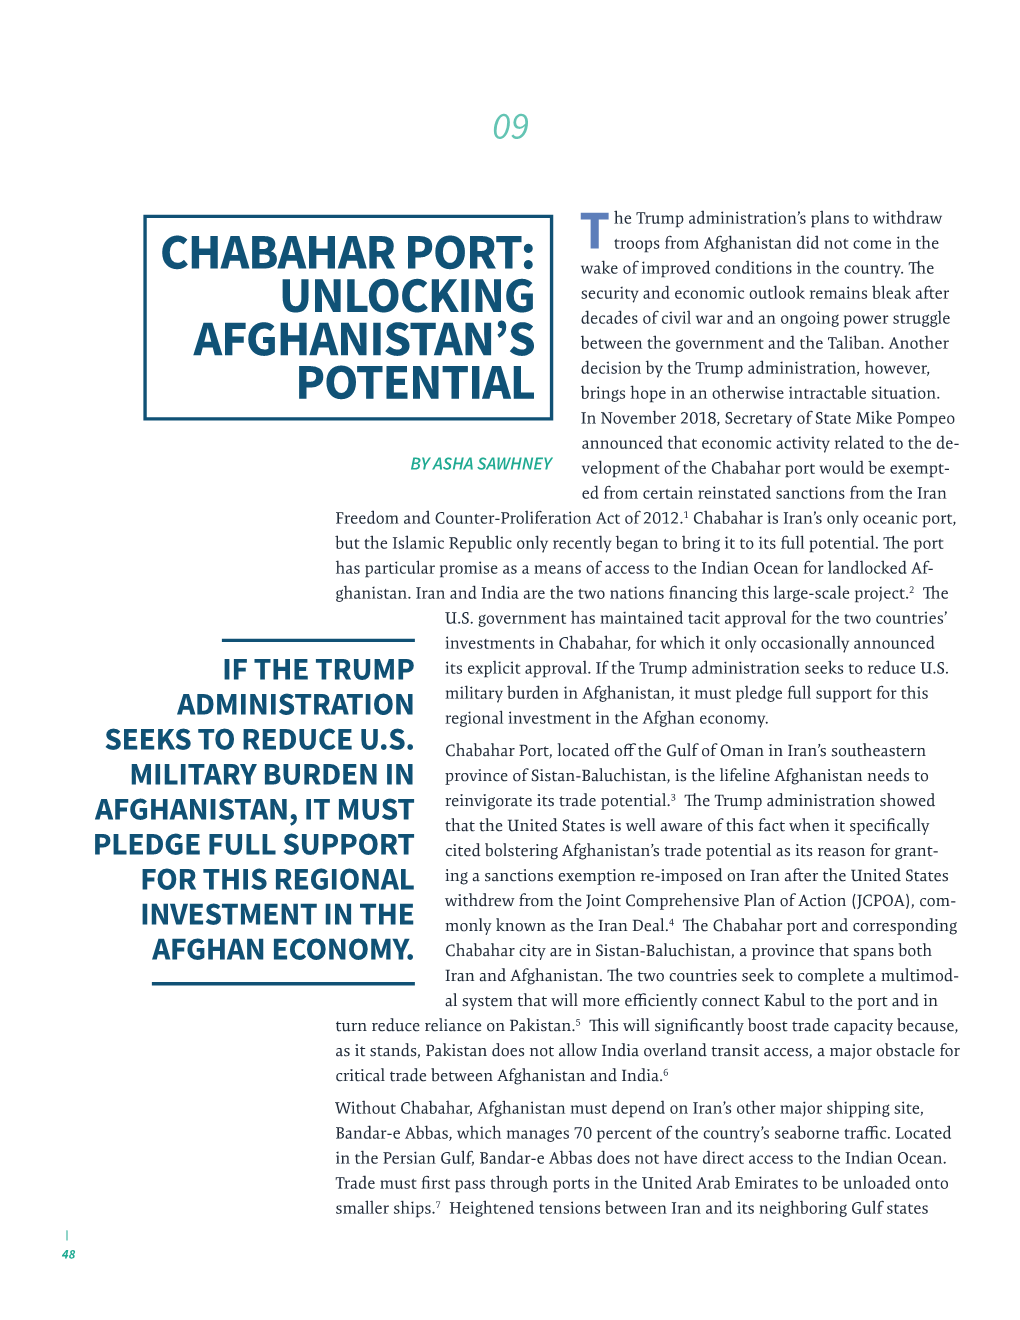 CHABAHAR PORT: Wake of Improved Conditions in the Country